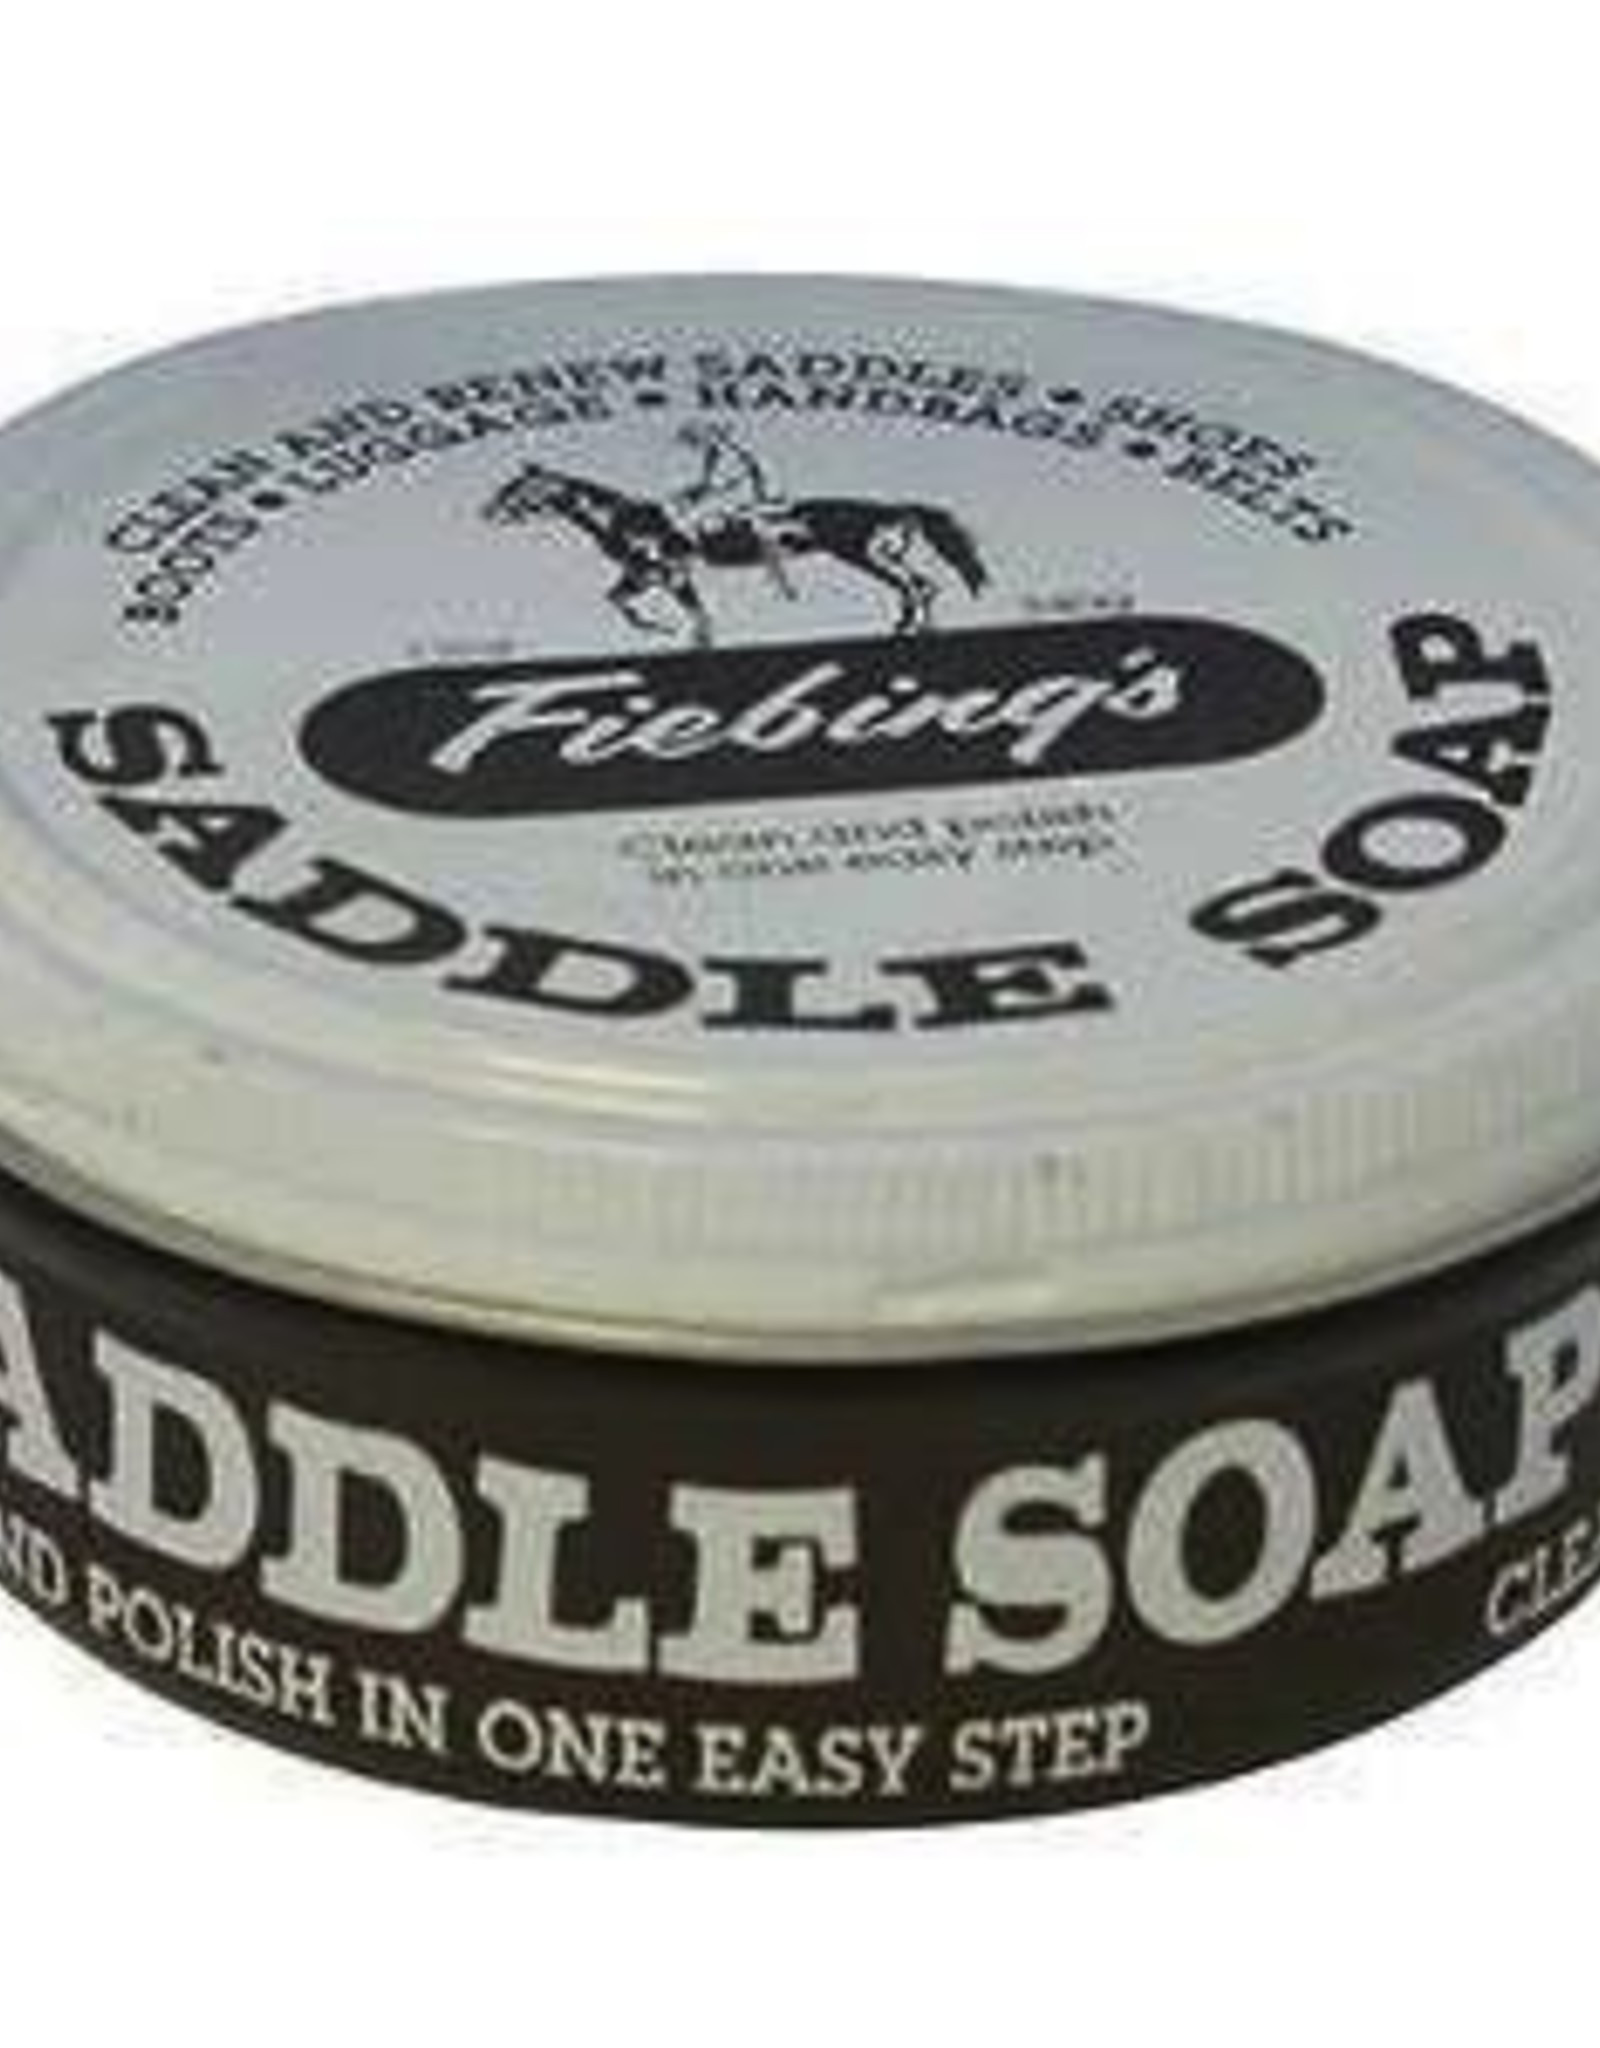 Fiebing's Saddle Soap White 3.5 oz Polish and Clean Leather Revives Color